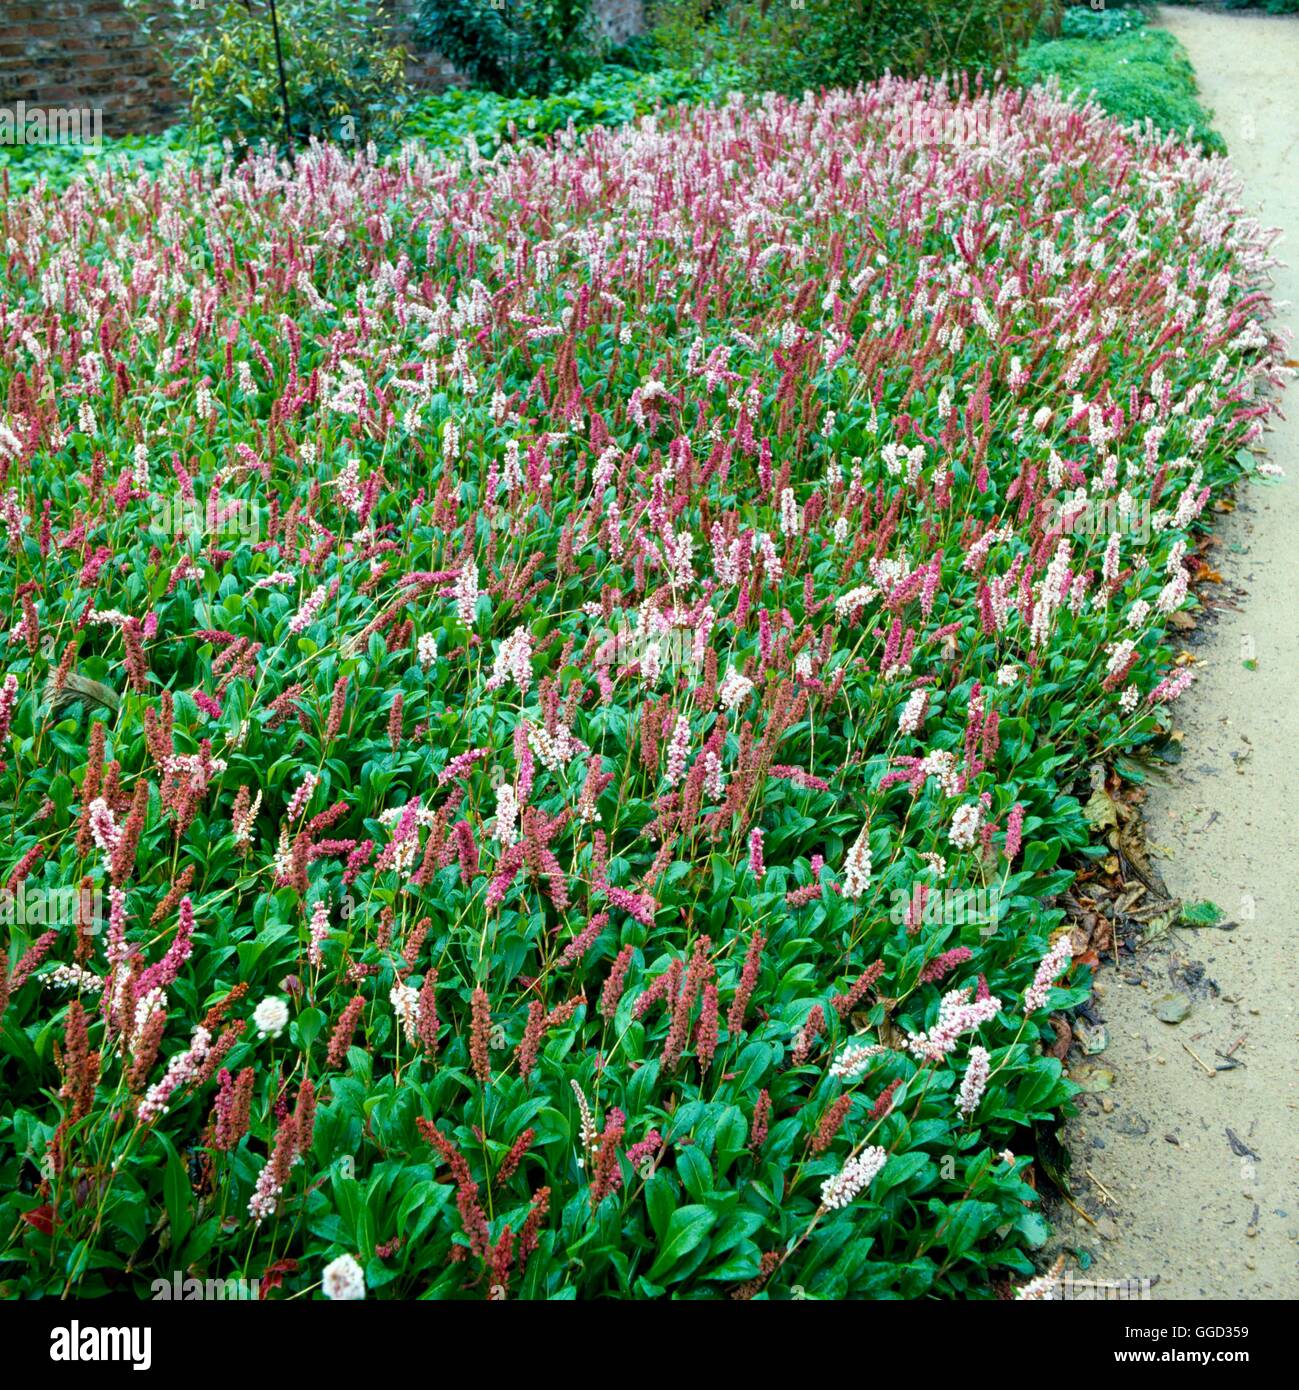 Persicaria affinis - 'Donald Lowndes' - (Syn Polygonum affine 'Donald Lowndes')   ALP036942     Phot Stock Photo